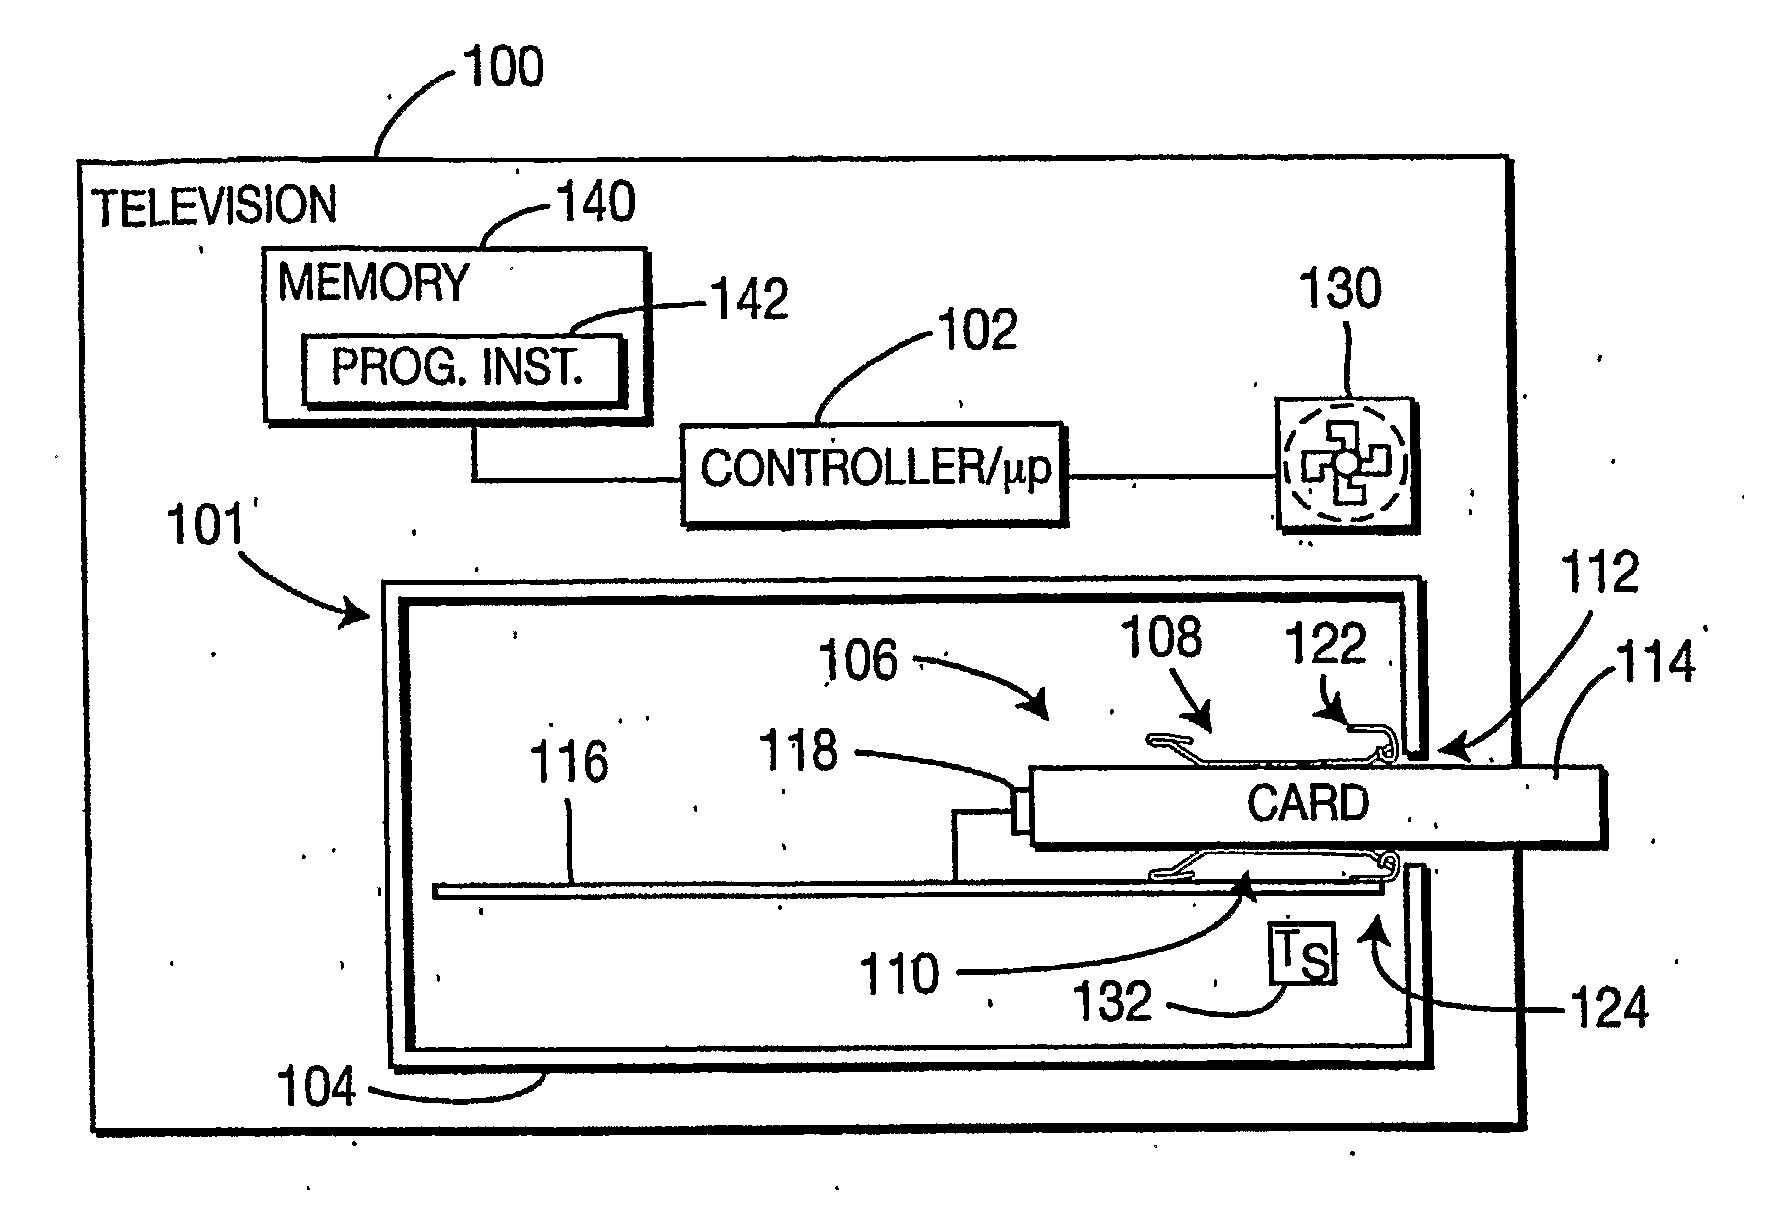 Electromagnetic Interference Shield and Heat Sink Apparatus